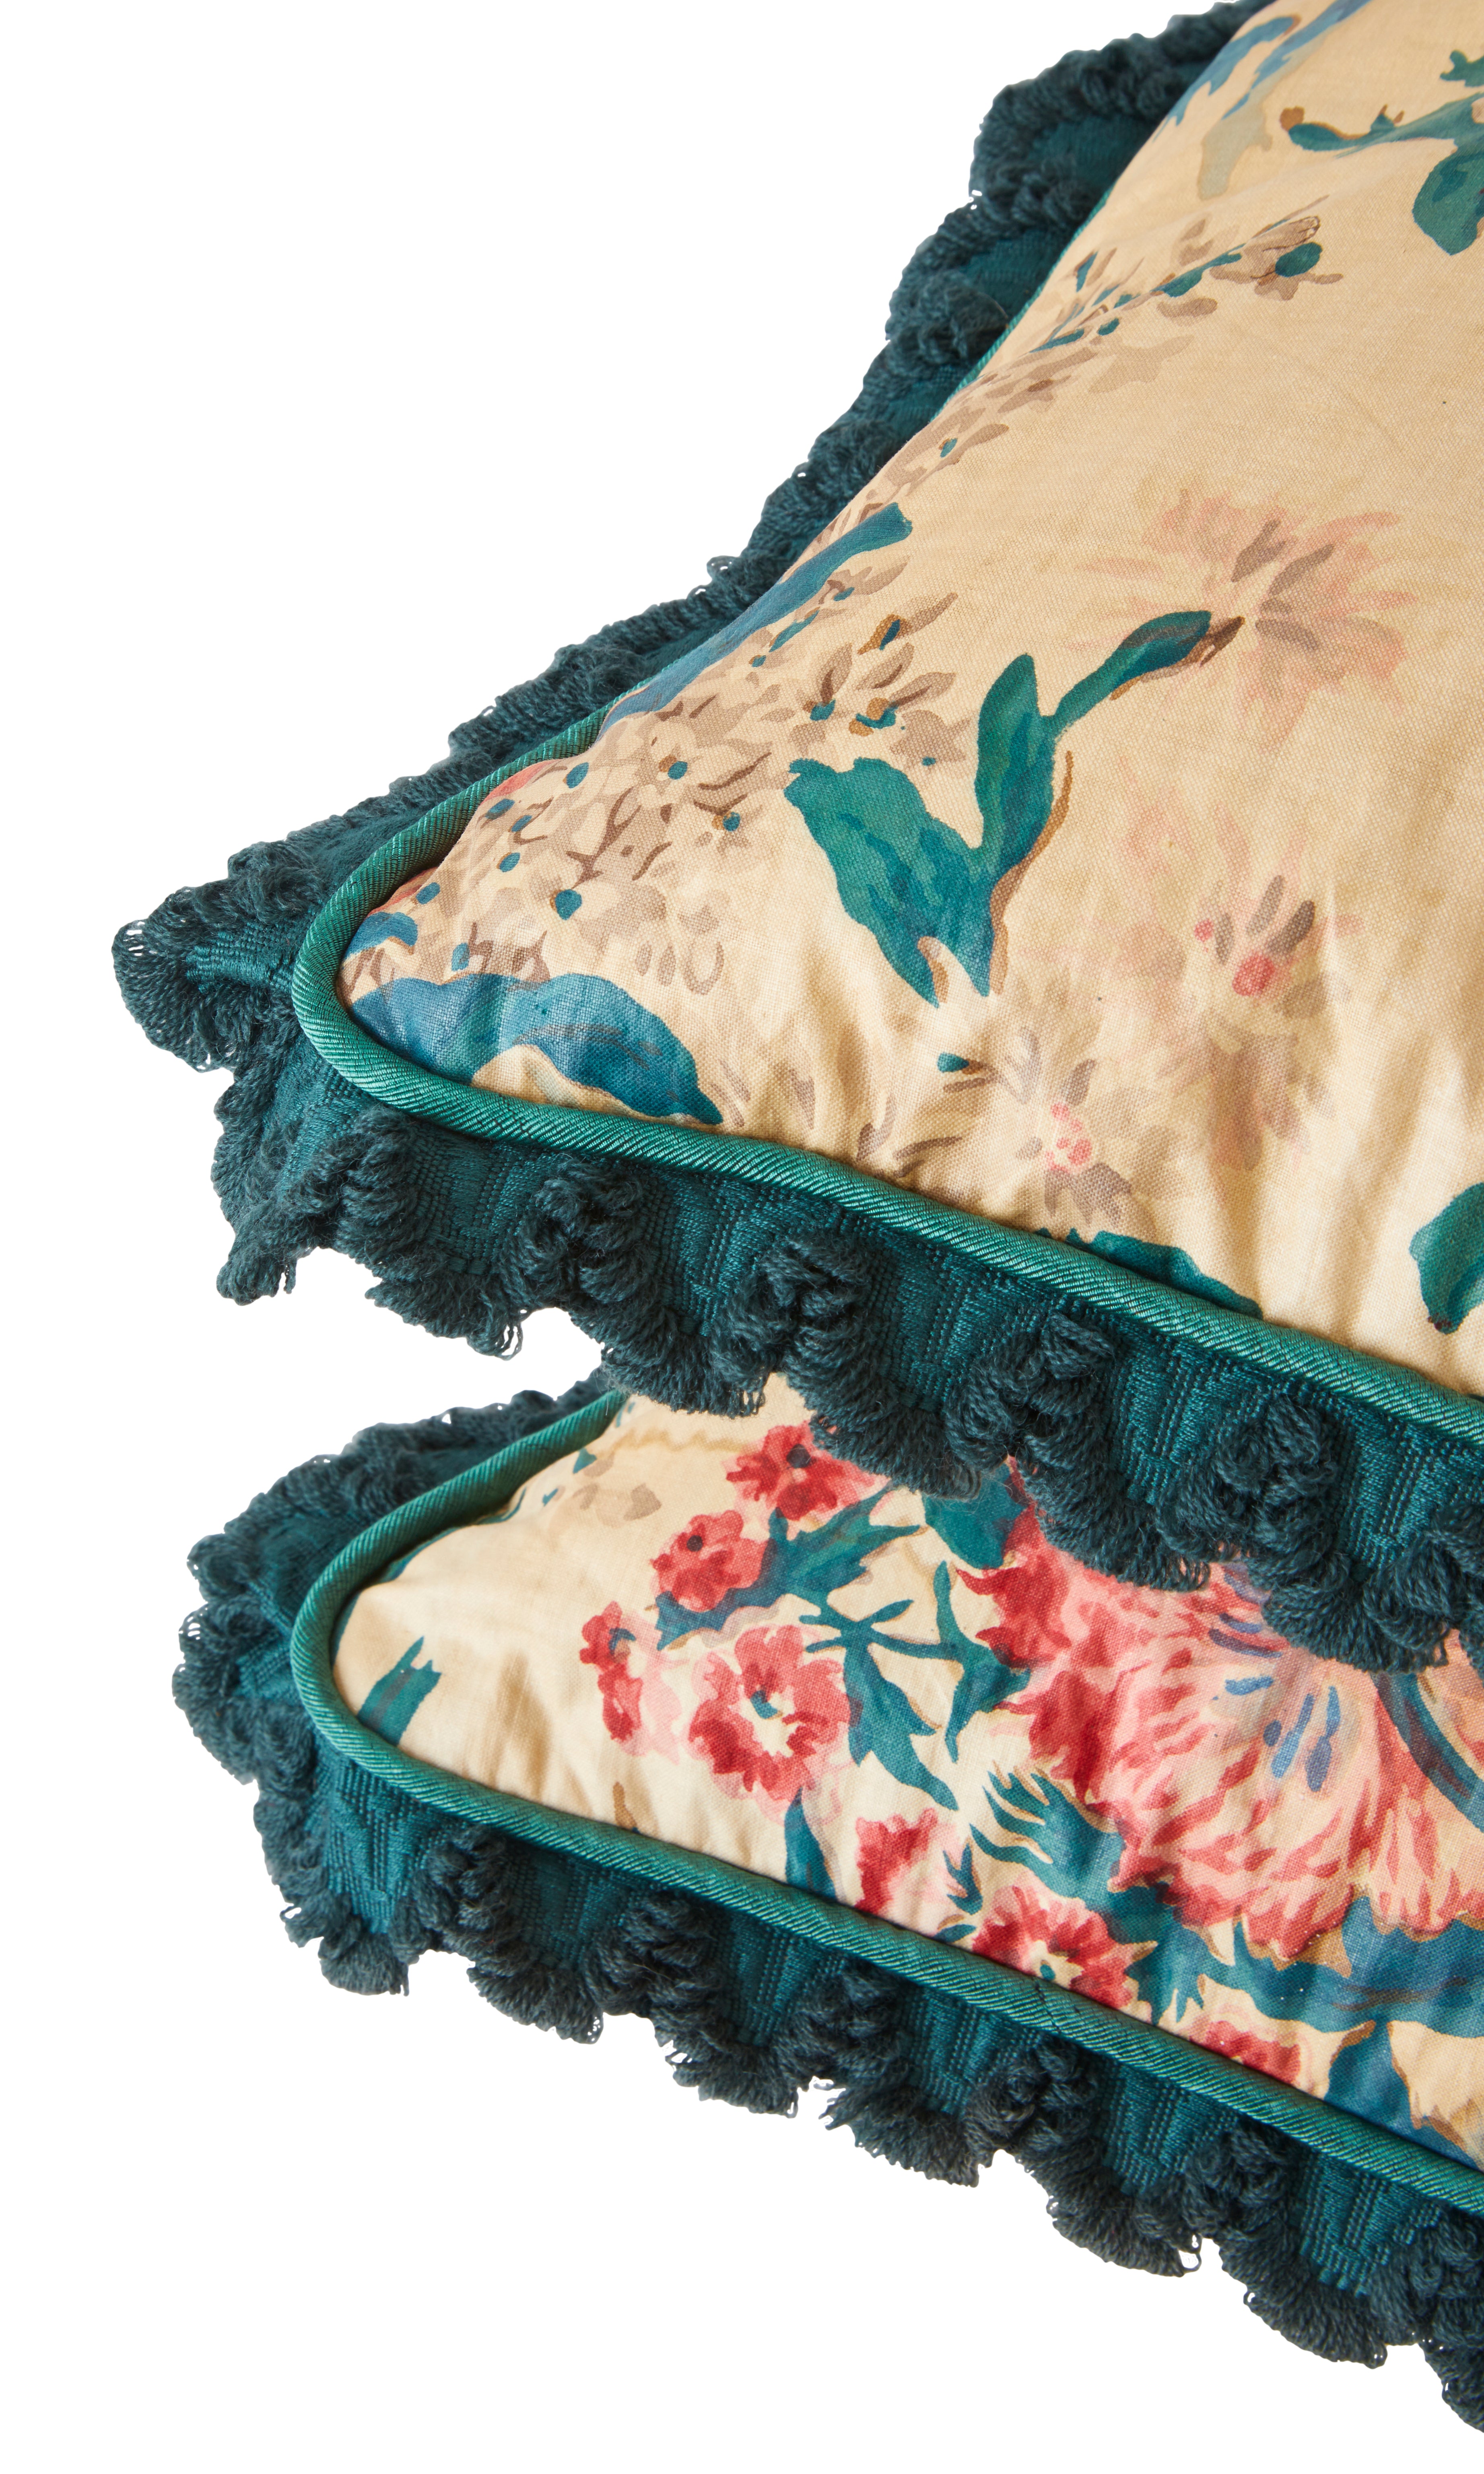 A Pair of Cushions made from 1920's English Glazed Floral Chintz with Moiré Piping and Scallop Fringe